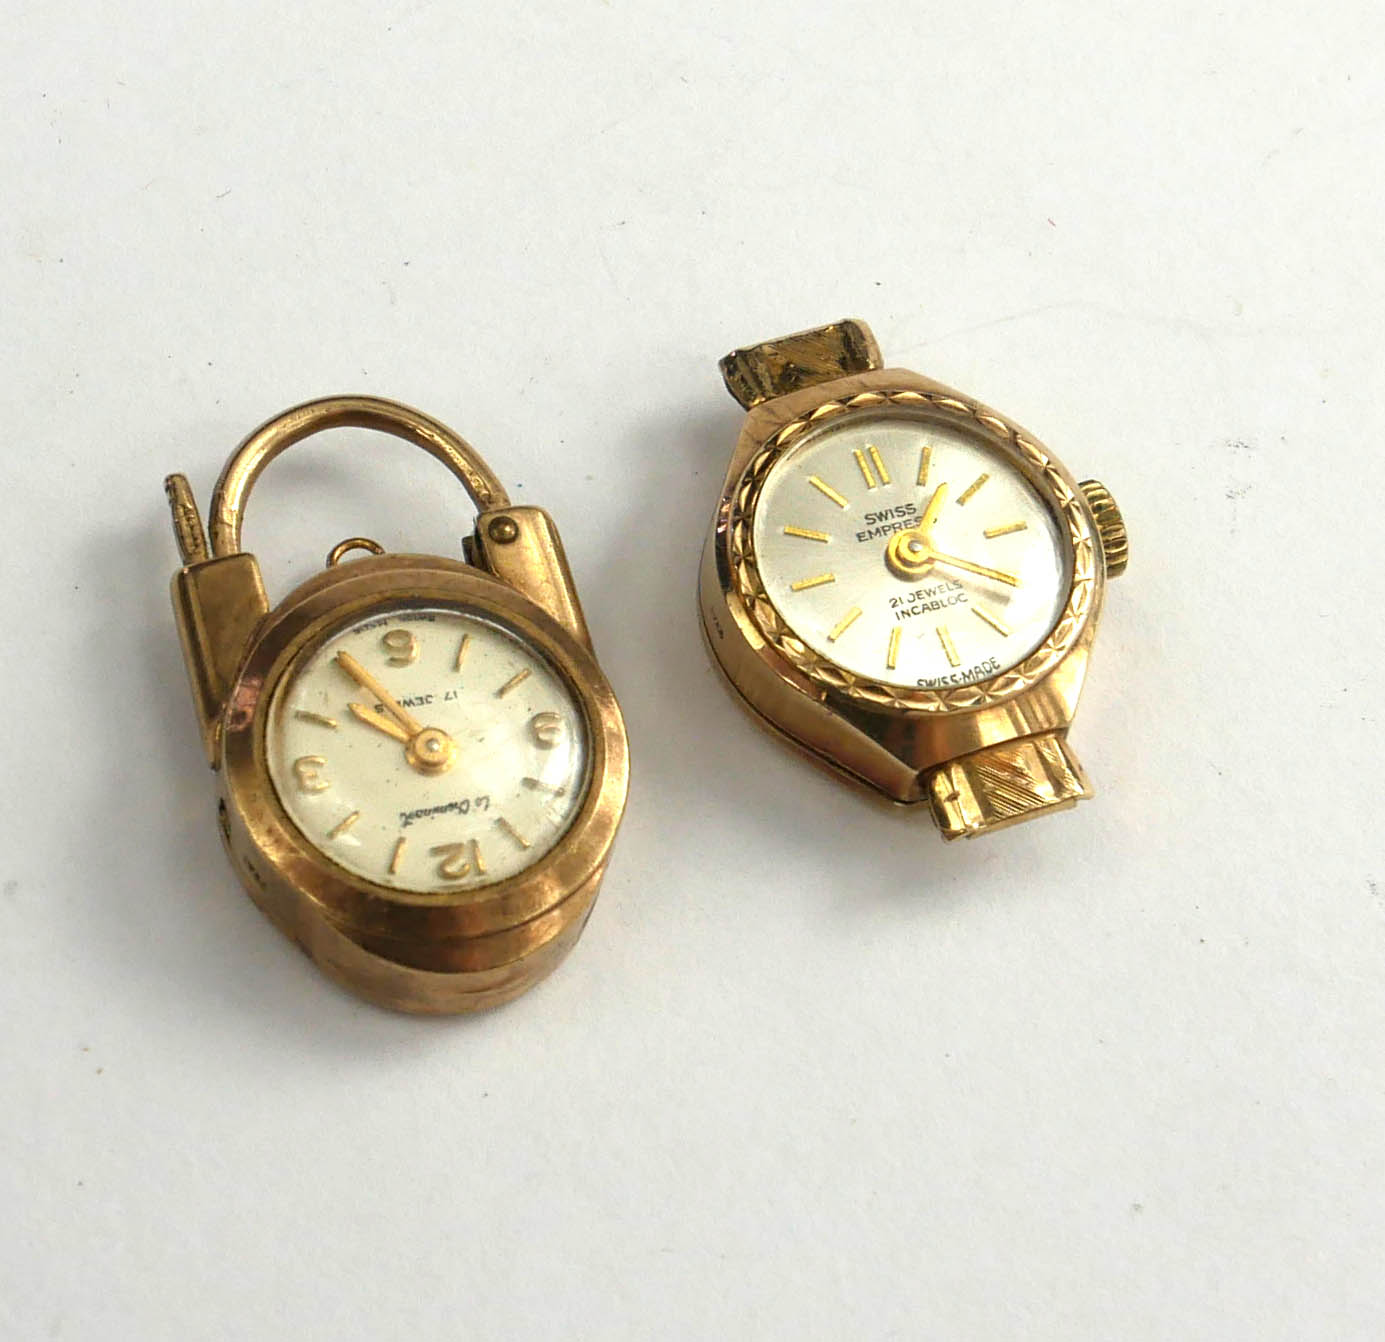 TWO VINTAGE 9CT GOLD LADIES’ WRISTWATCHES To include a silver tone dial watch marked 'Swiss